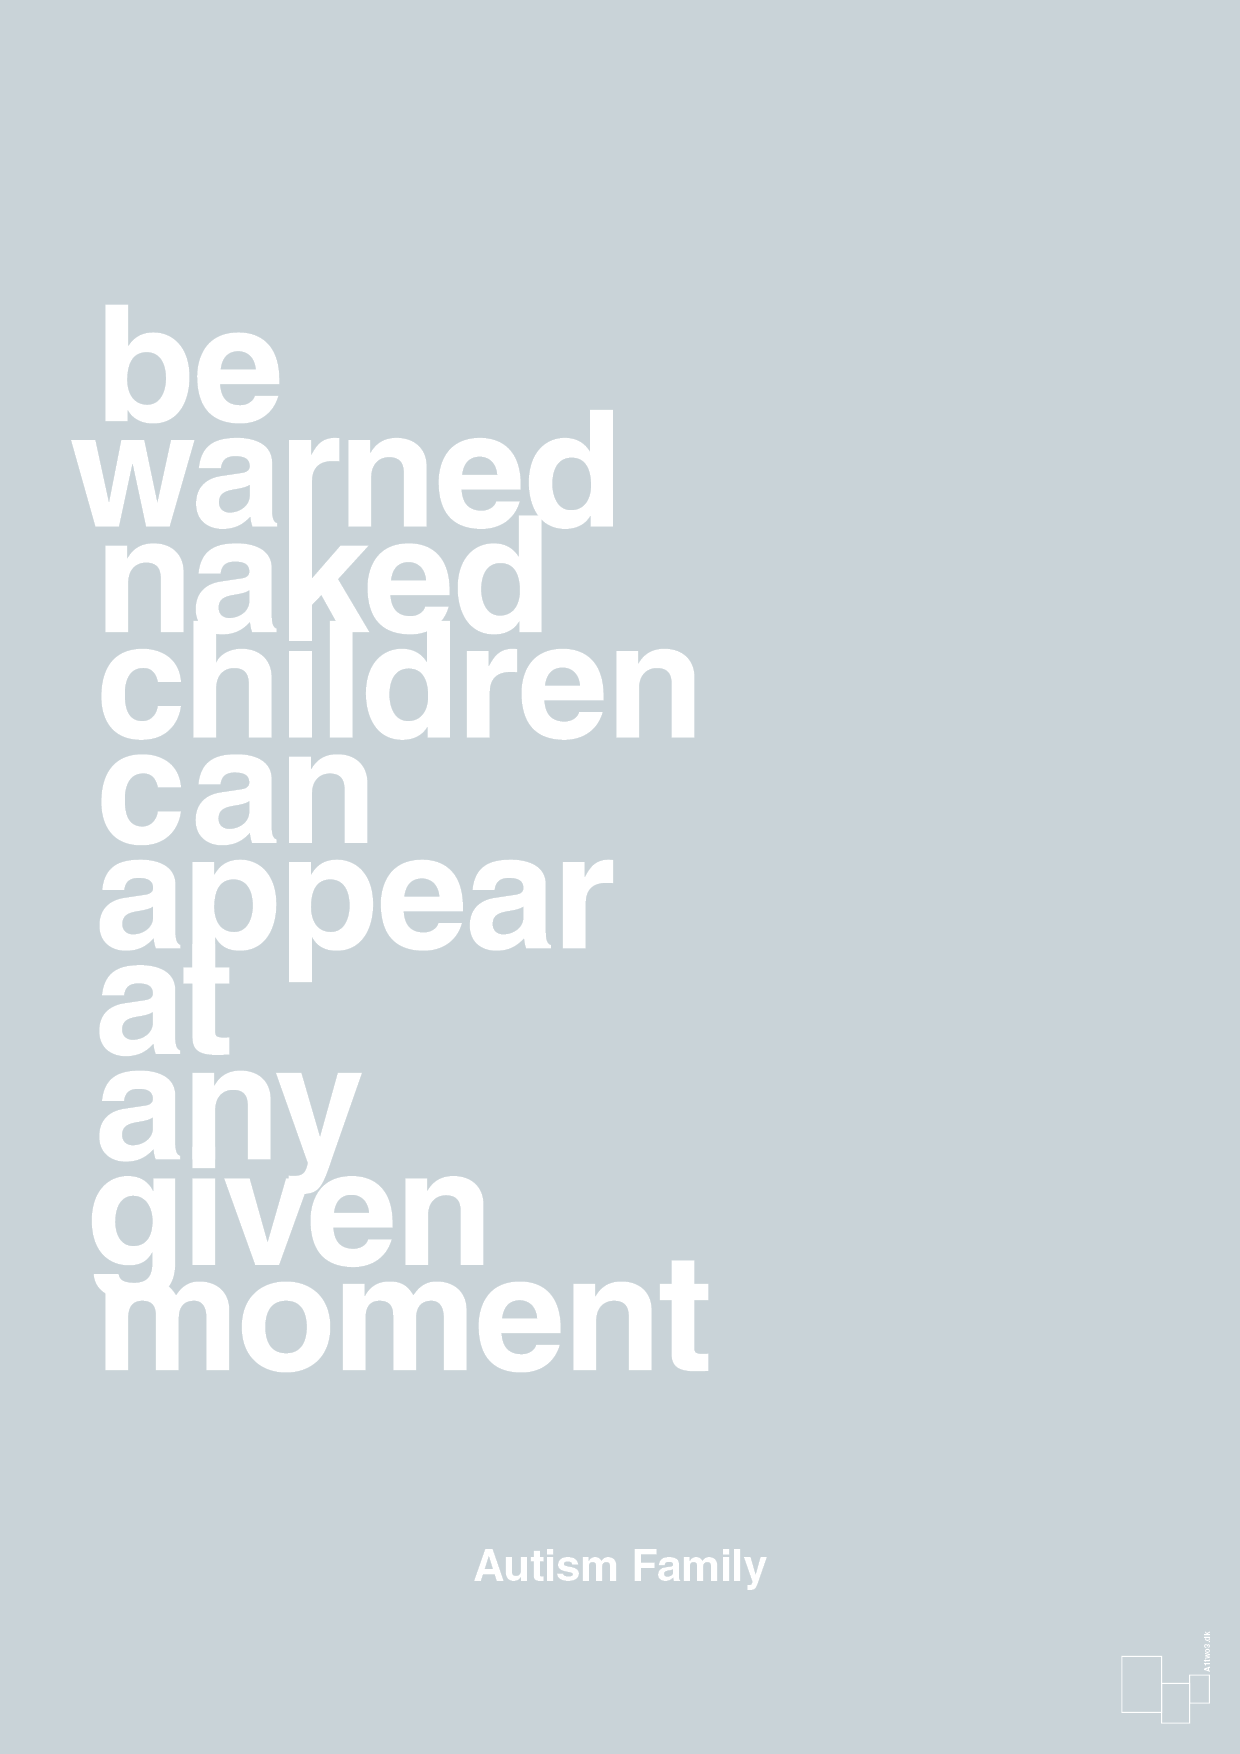 be warned naked children can appear at any given moment - Plakat med Samfund i Light Drizzle